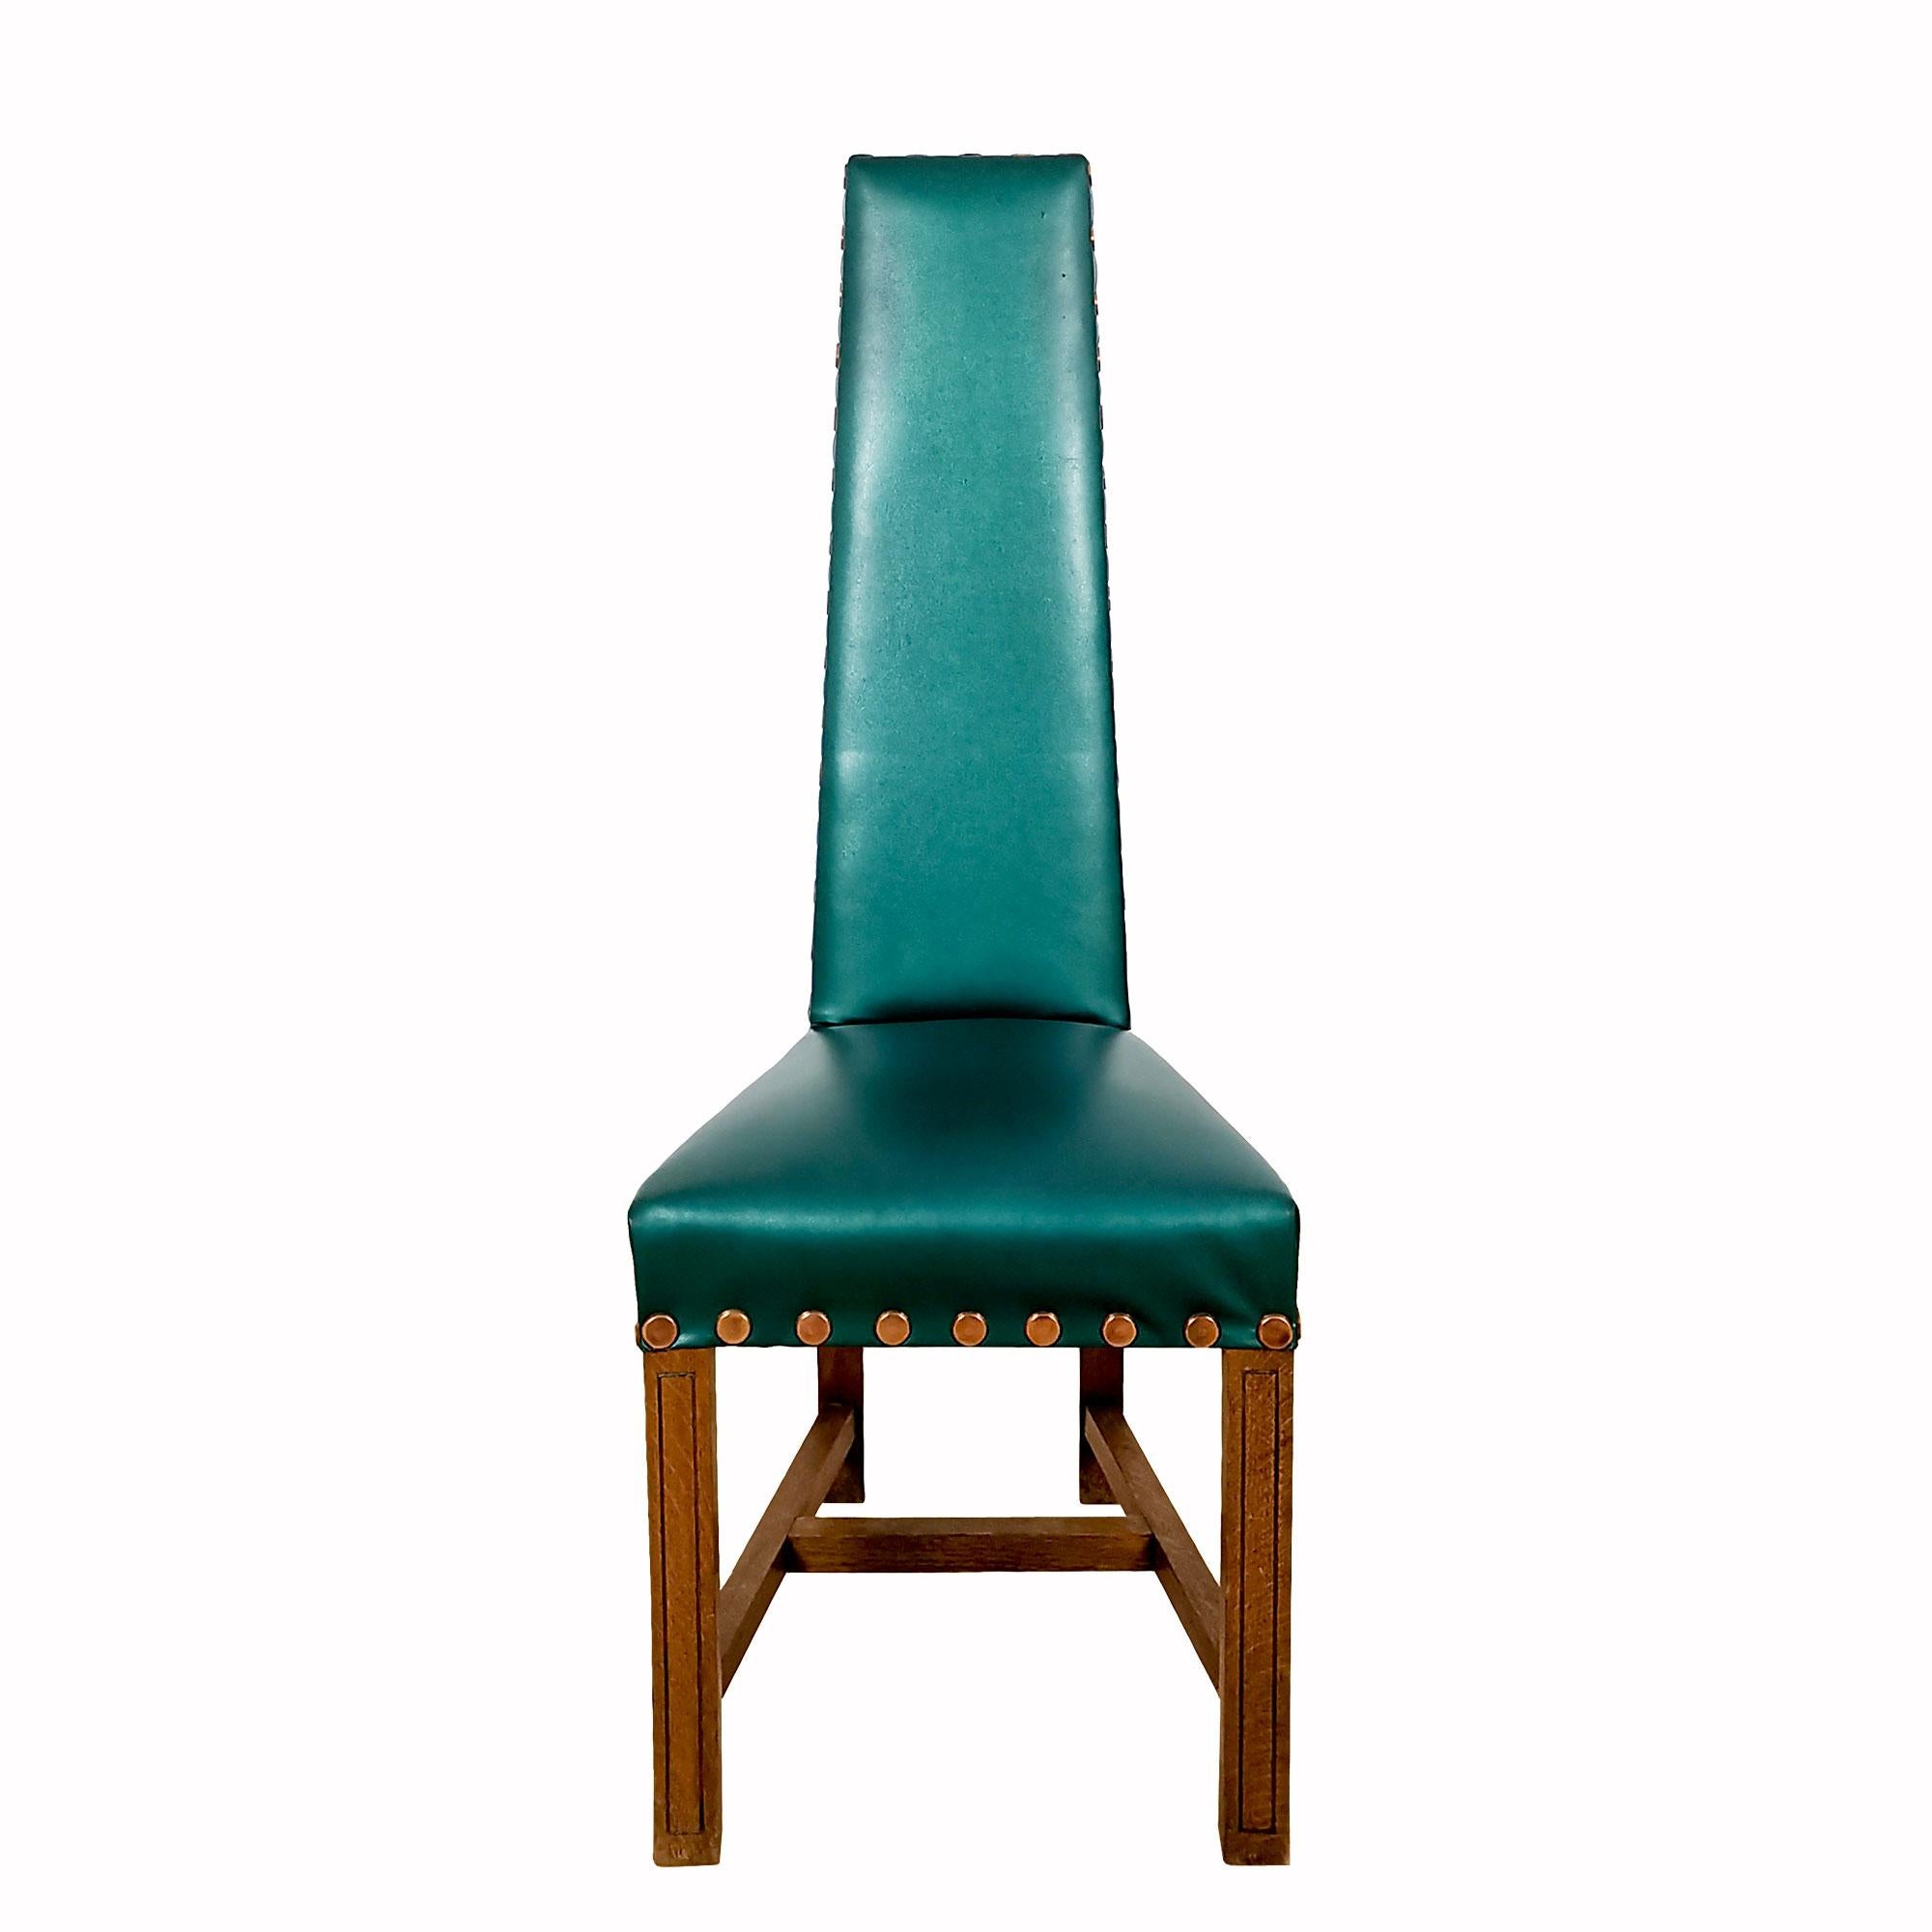 Set of 4 solid oak chairs with high backs, original blue-turquoise skai (faux leather) upholstery. Polished brass finishing large studs. 

Spain c. 1960.